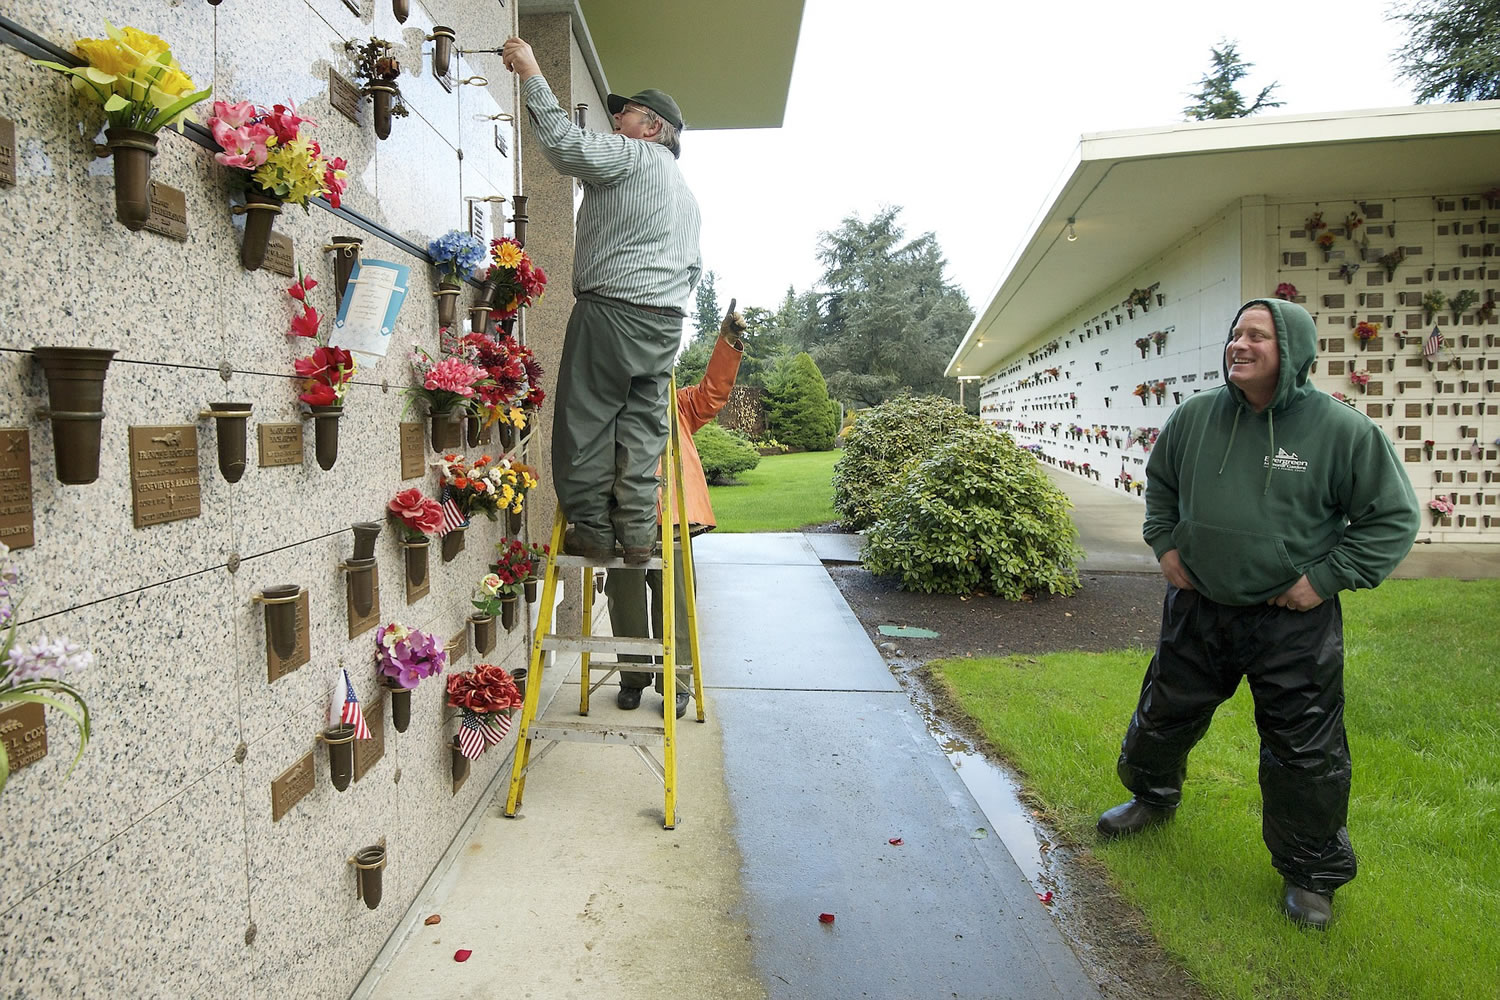 Greg Melum, grounds foreman for Evergreen Memorial Gardens cemetery, right, jokes with co-workers Joe A. Chipman, left, and Ruben Alonso, background, as Chipman prepares to place an urn into a niche of the mausoleum.